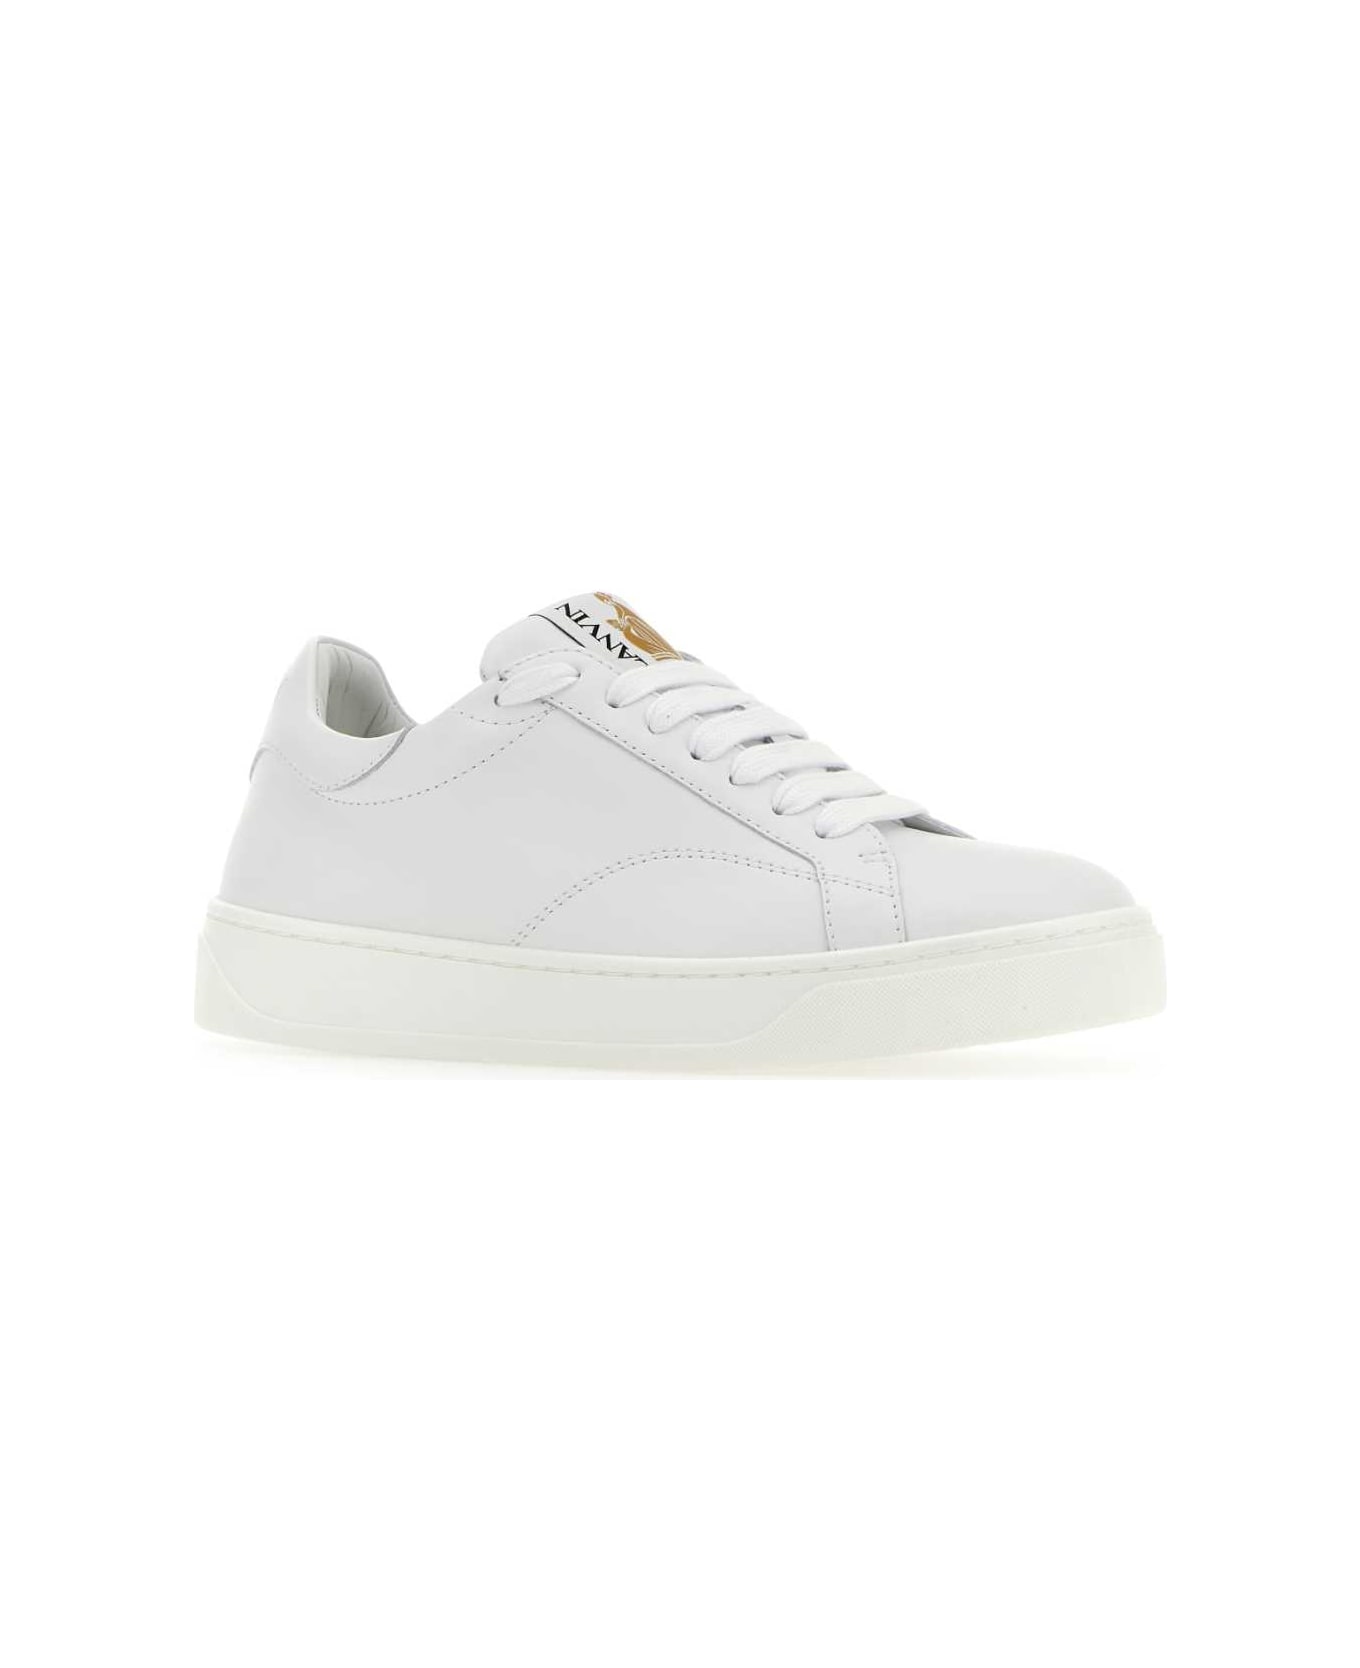 Lanvin White Leather Ddb0 Sneakers - WHITEWHITE スニーカー